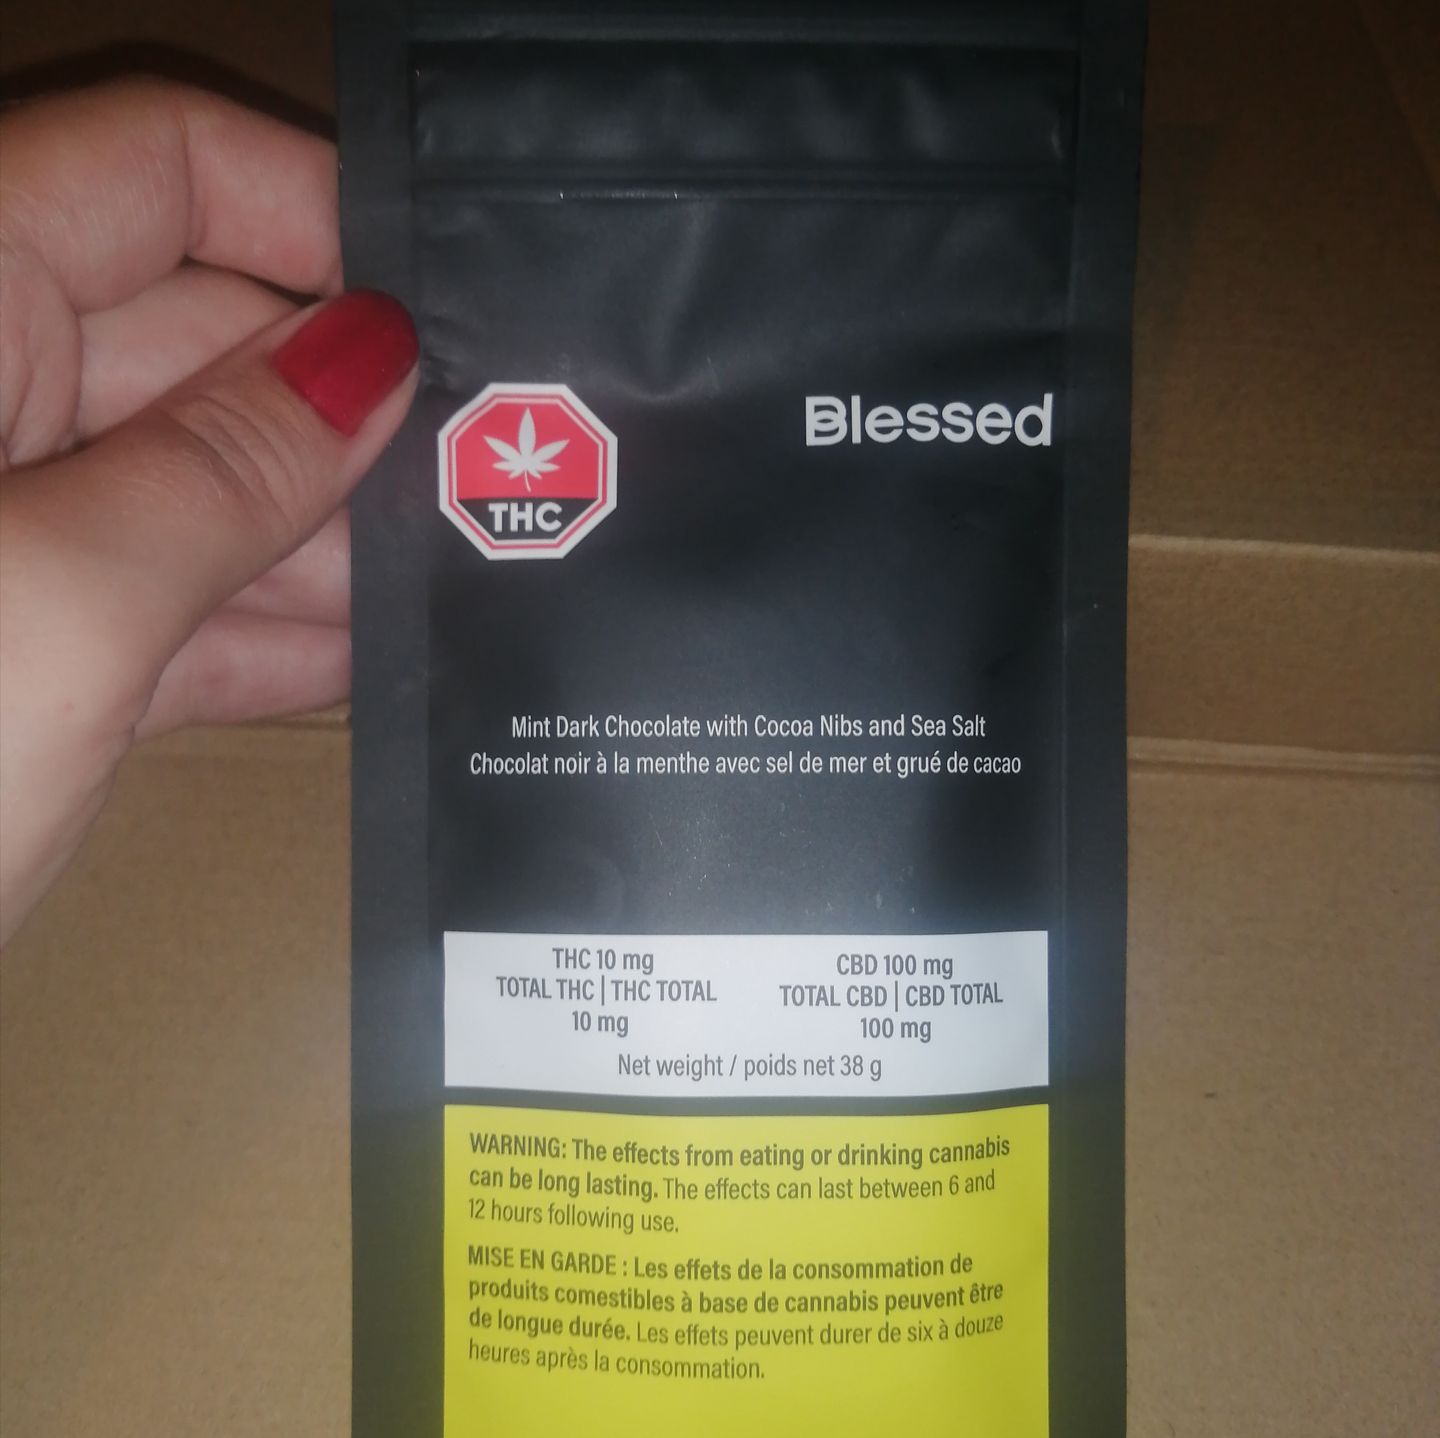 A review of the mint dark chocolate bar by Blessed 